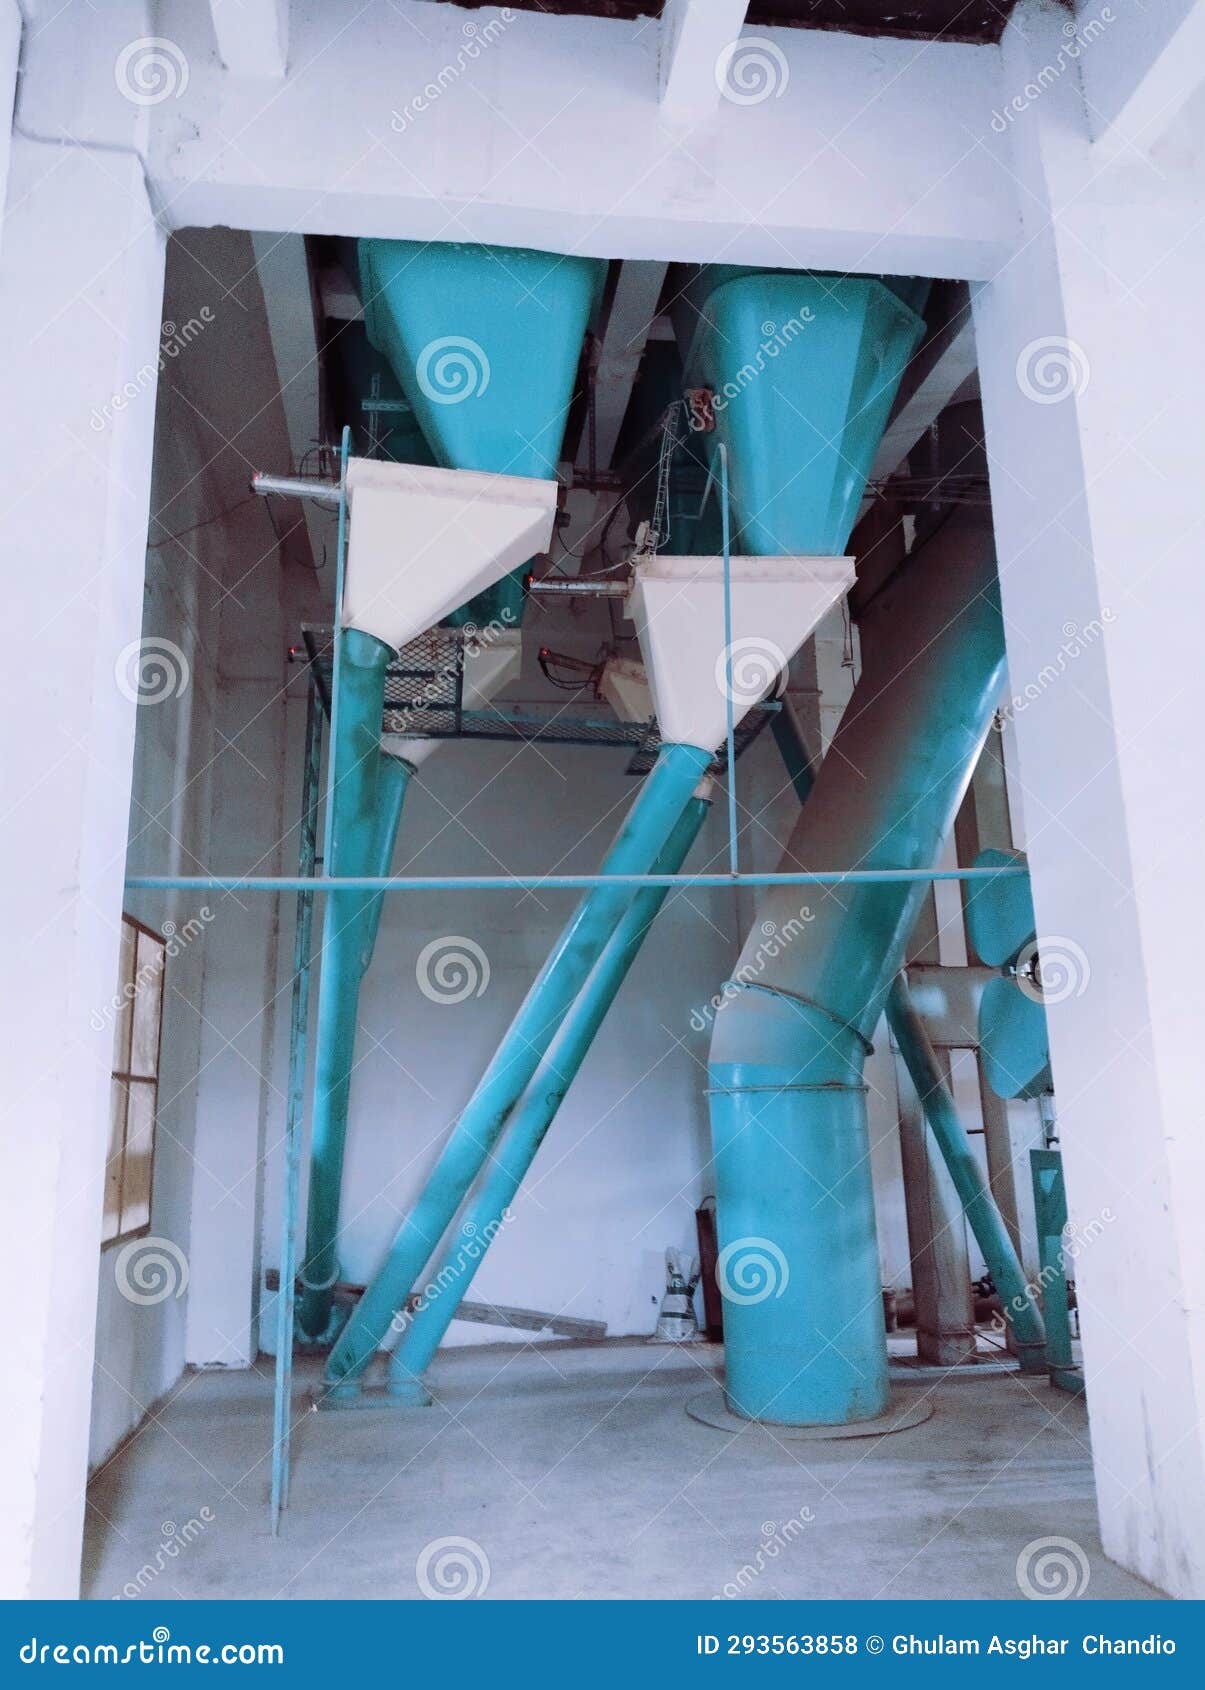 feed mill plant poultry feed-pellet processing unit machinery factory equipment feed-mills provenderie, fabrica piensos photo